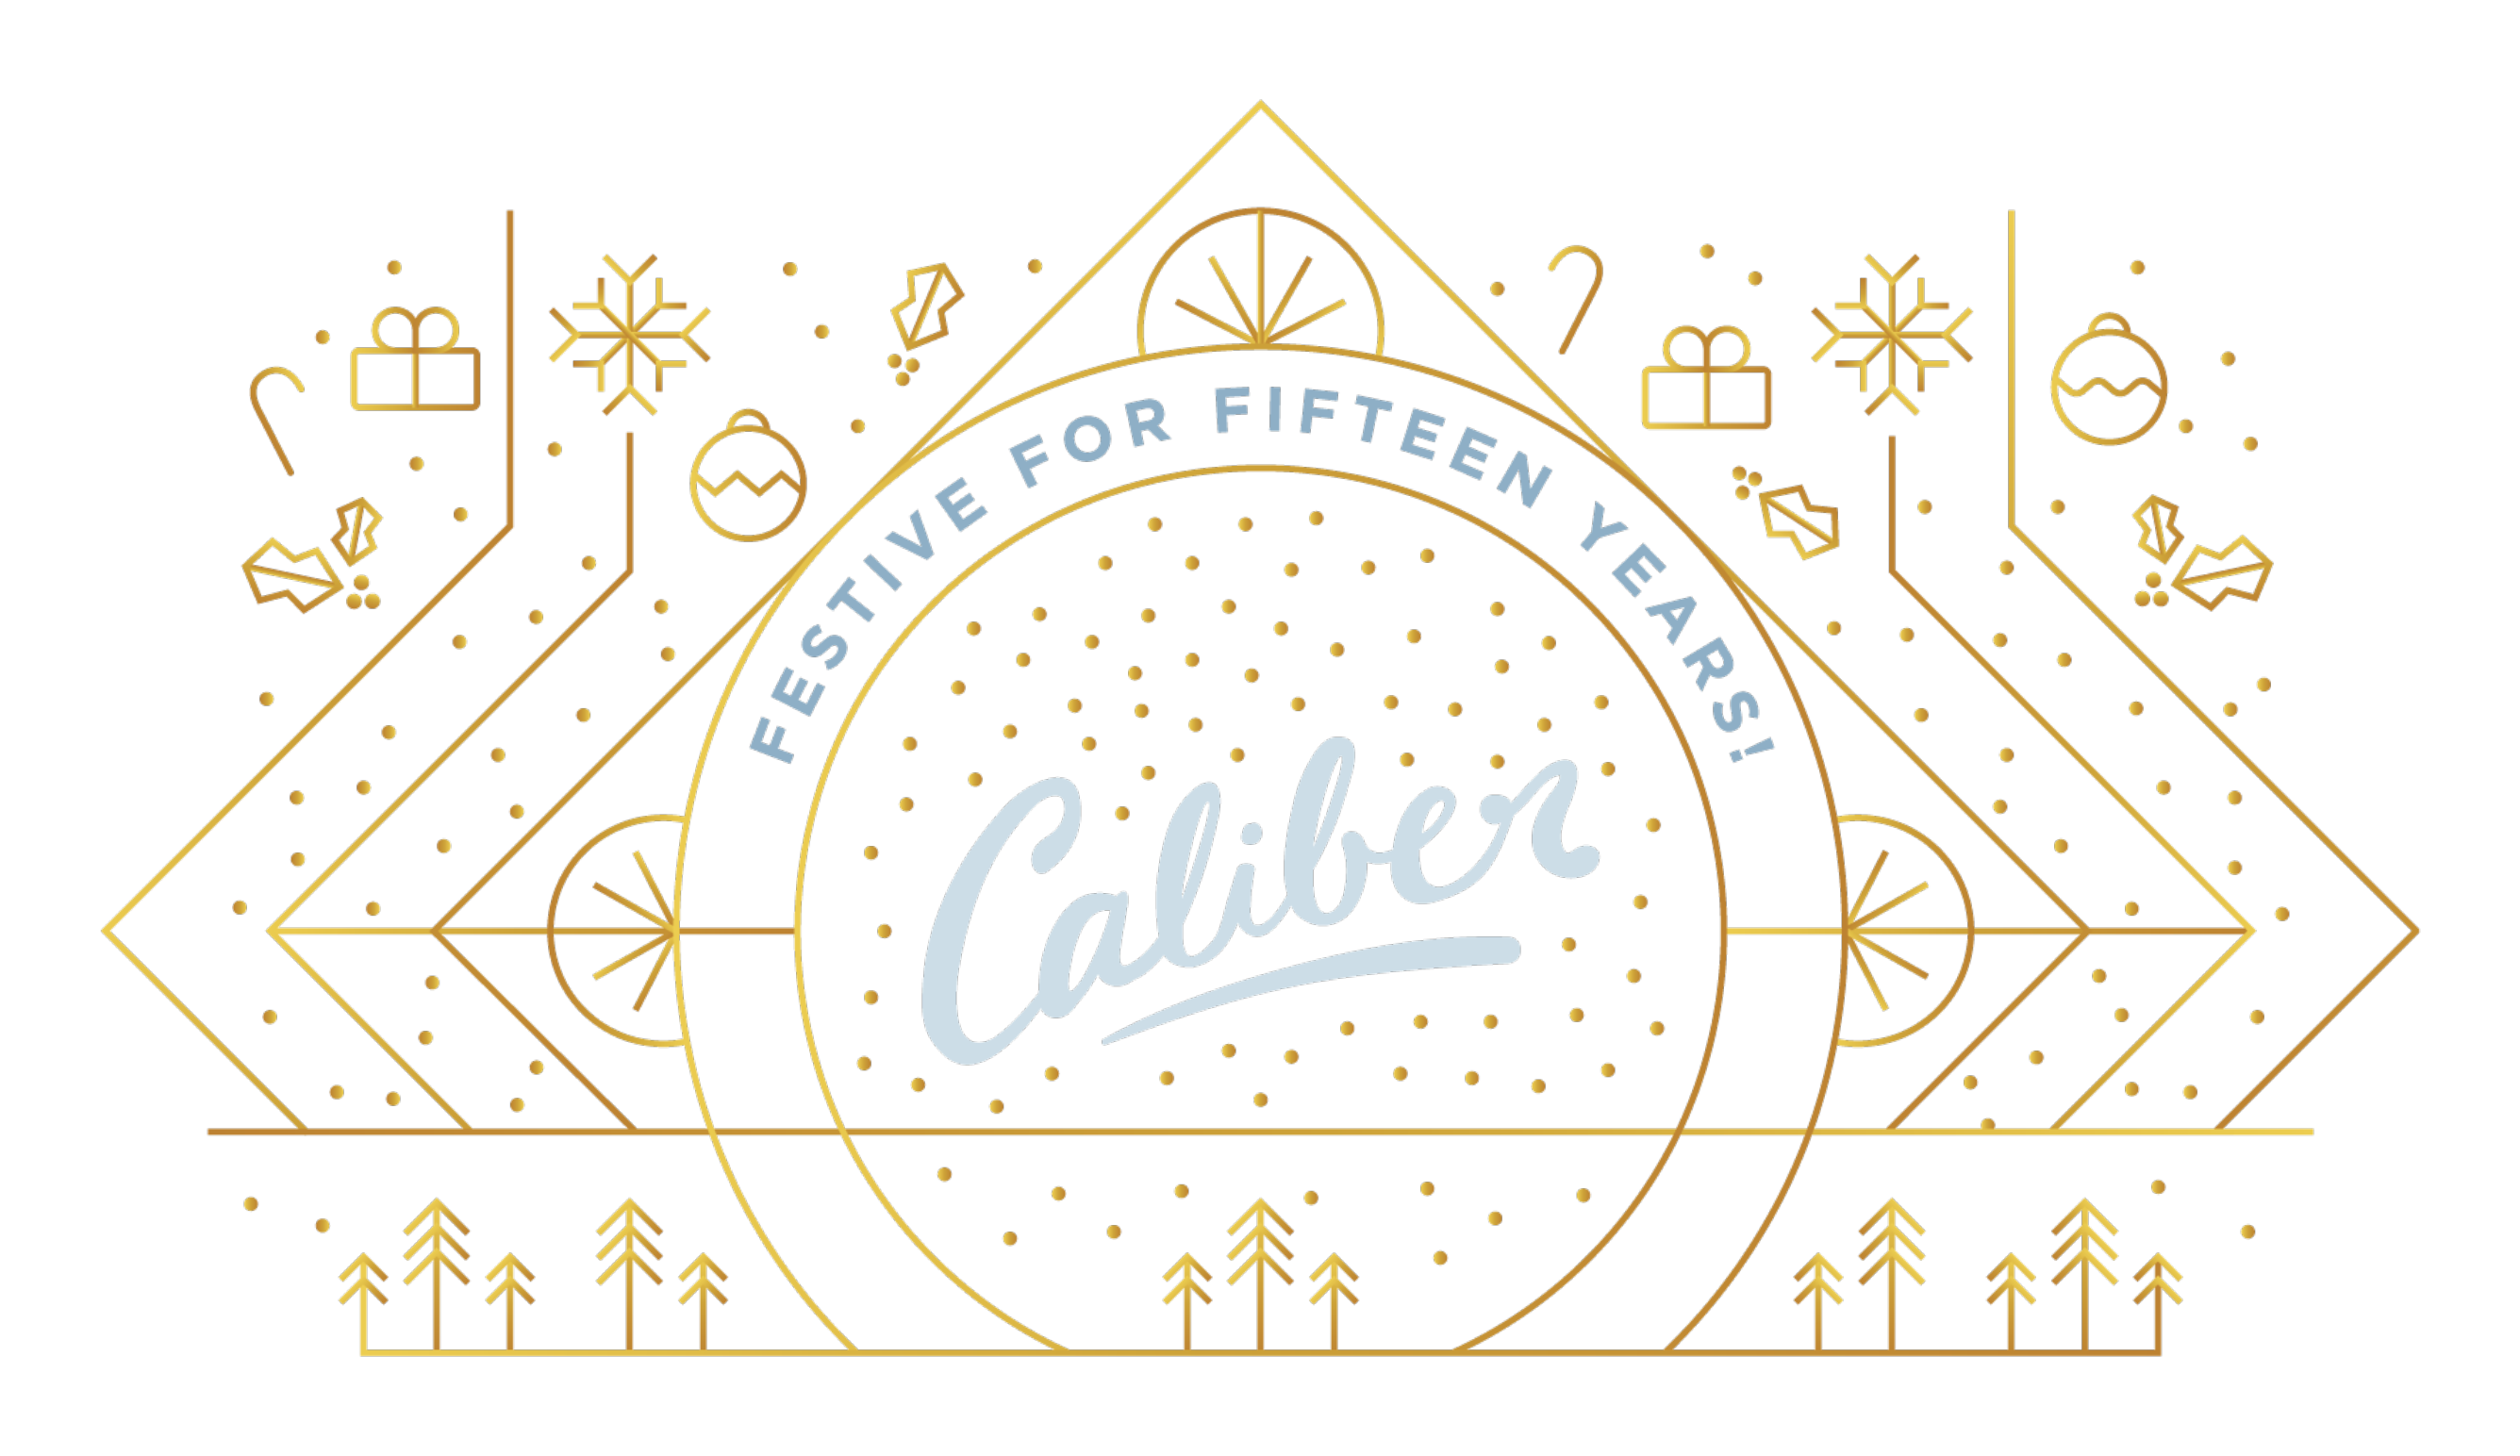 Caliber Festive for Fifteen Years!